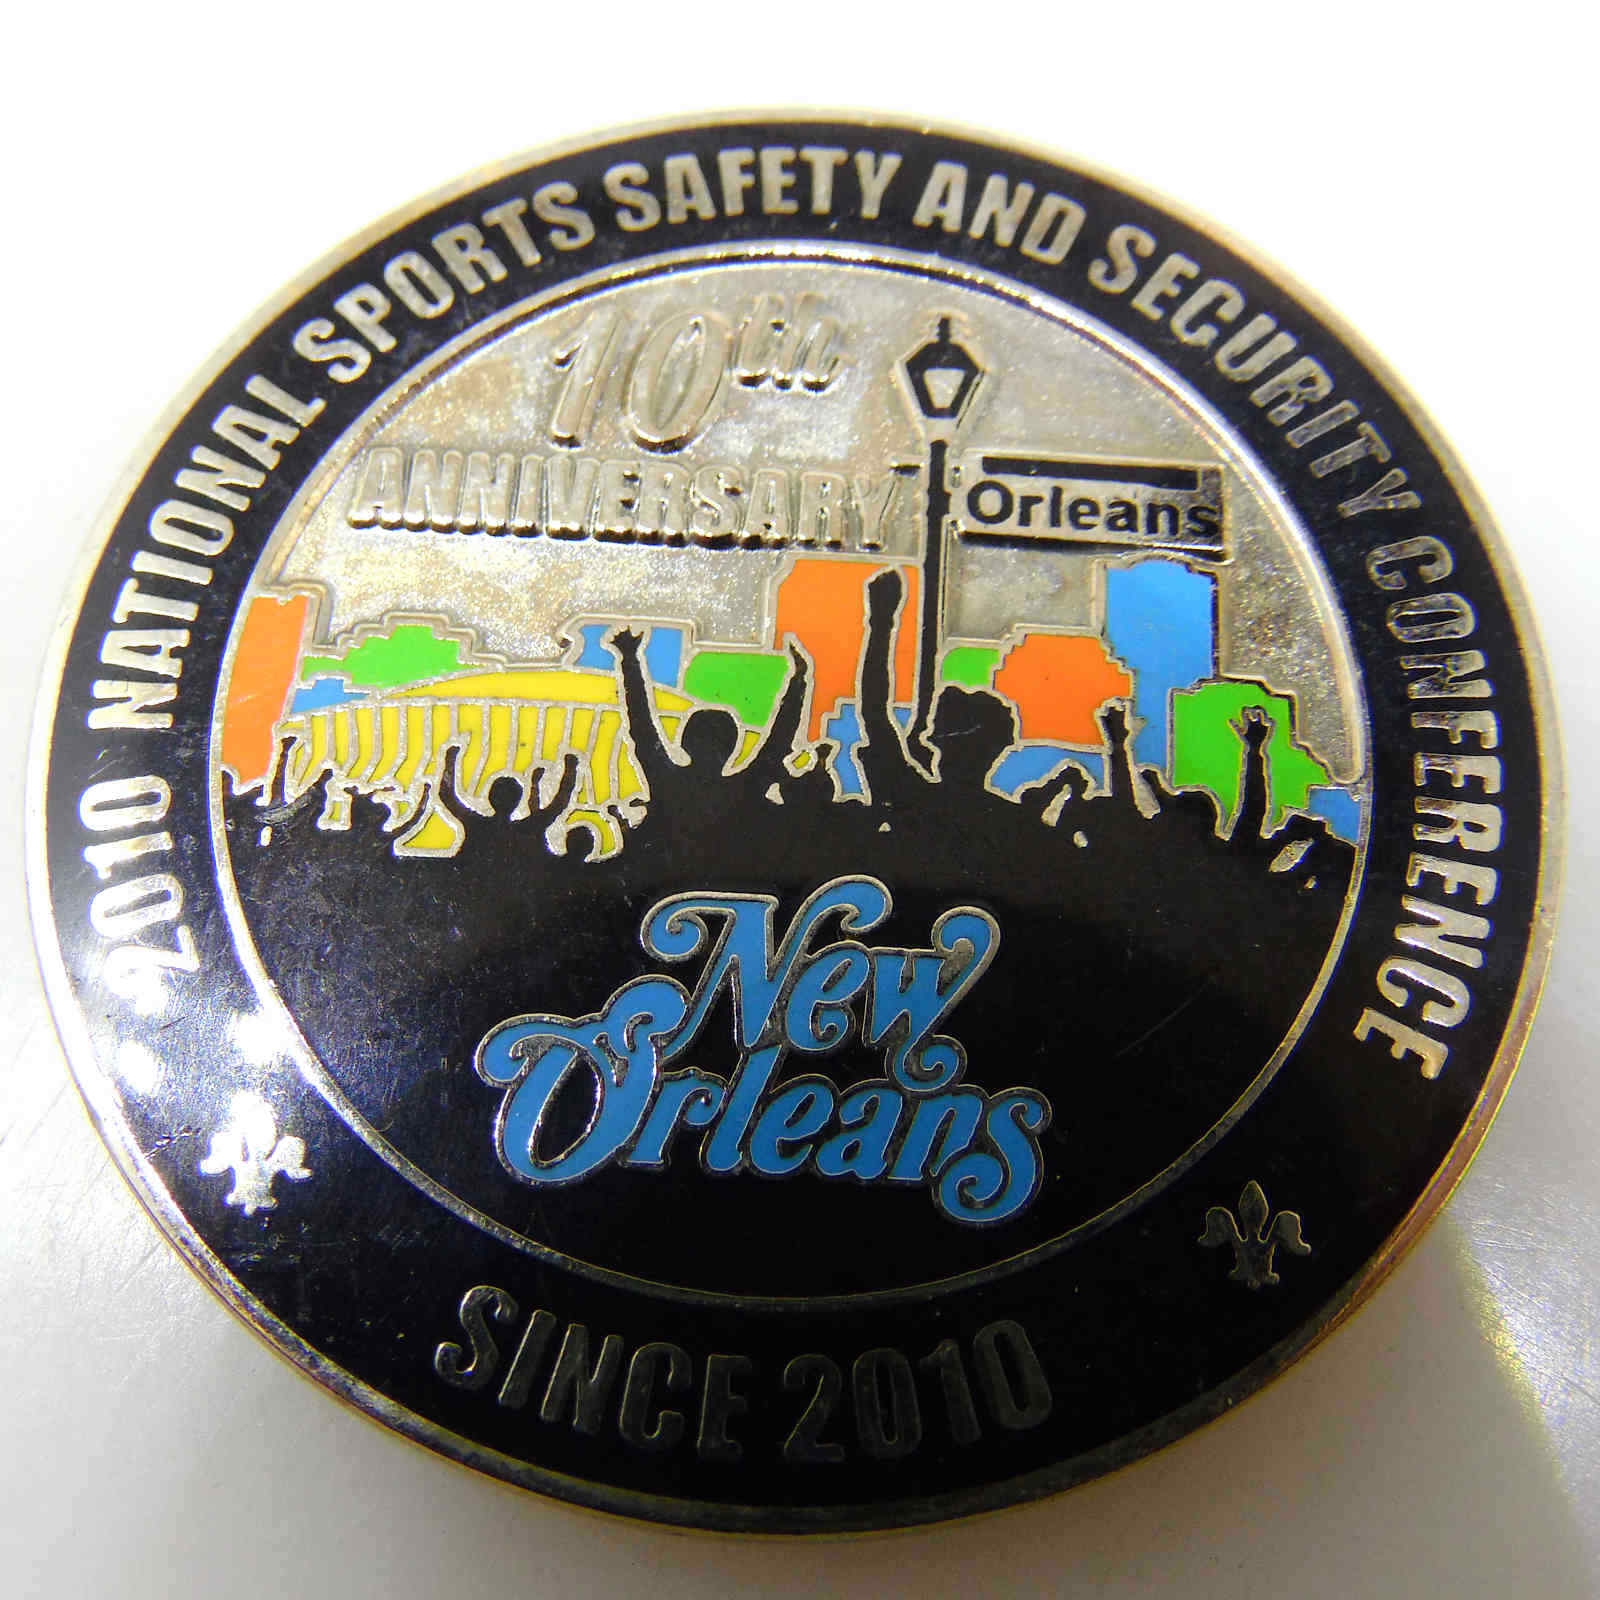 2010 NATIONAL SPORTS SAFETY AND SECURITY CONFERENCE CHALLENGE COIN